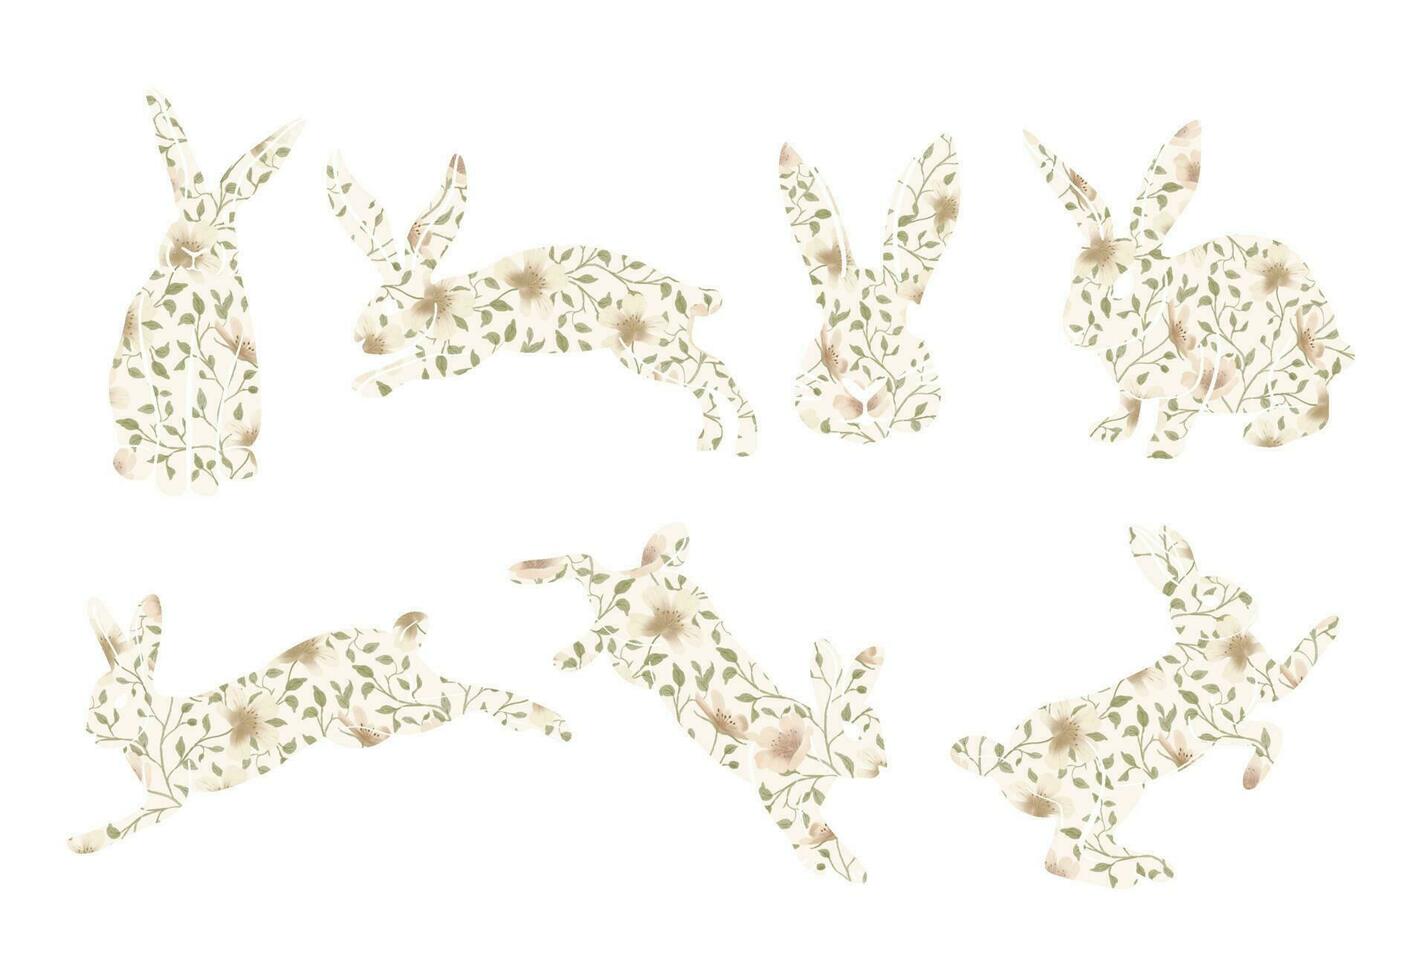 Watercolor style rabbit silhouette illustration set with spring blossom flowers. vector